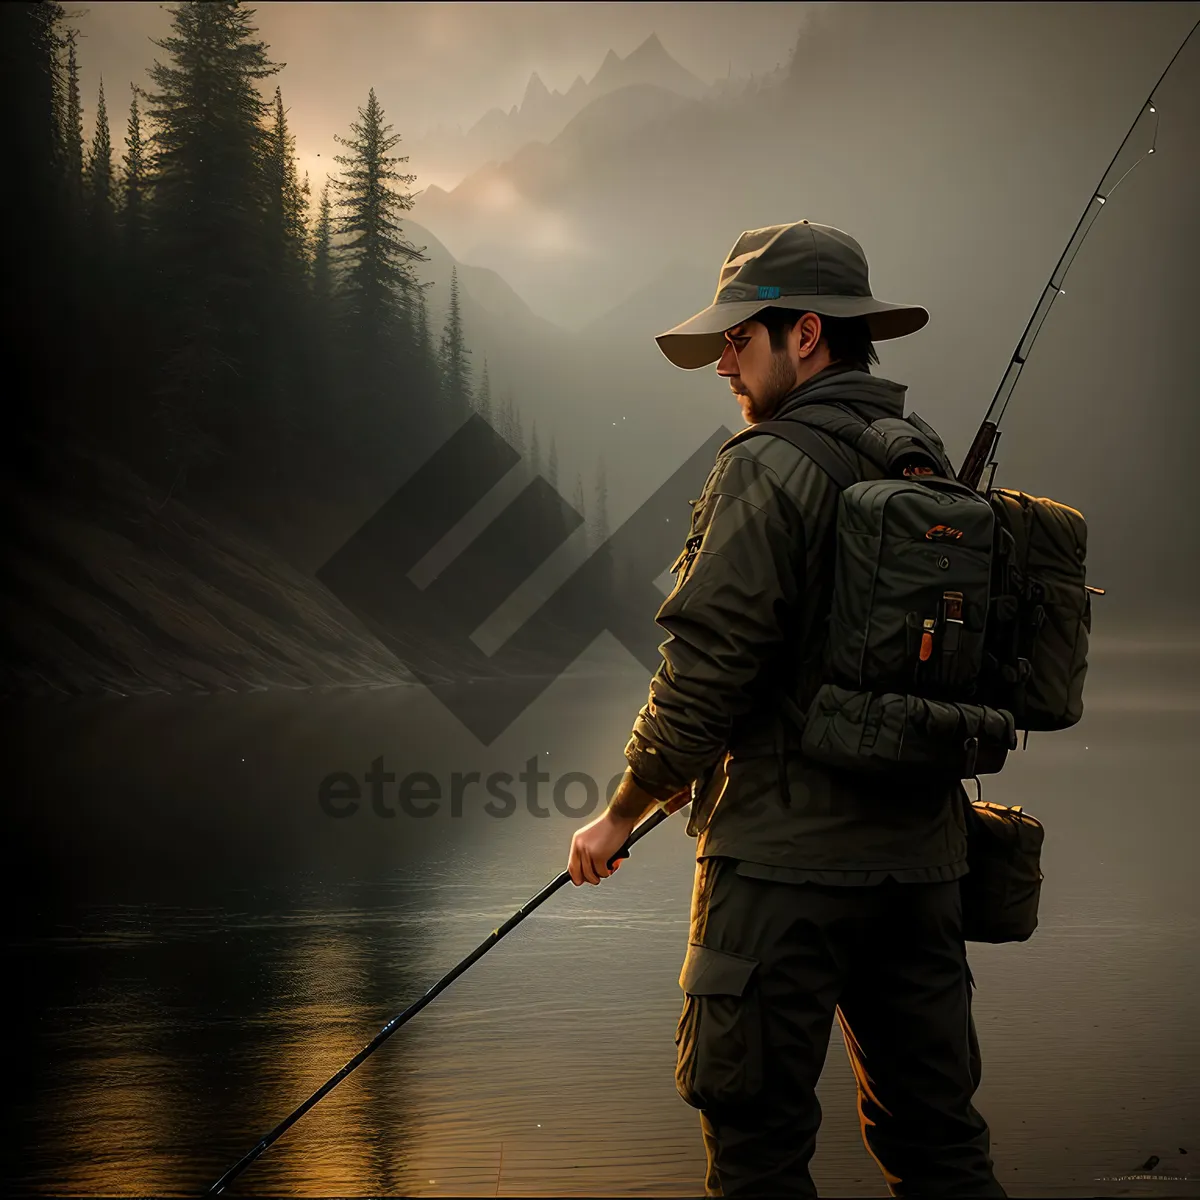 Picture of Outdoor Sportsman with Fishing Gear